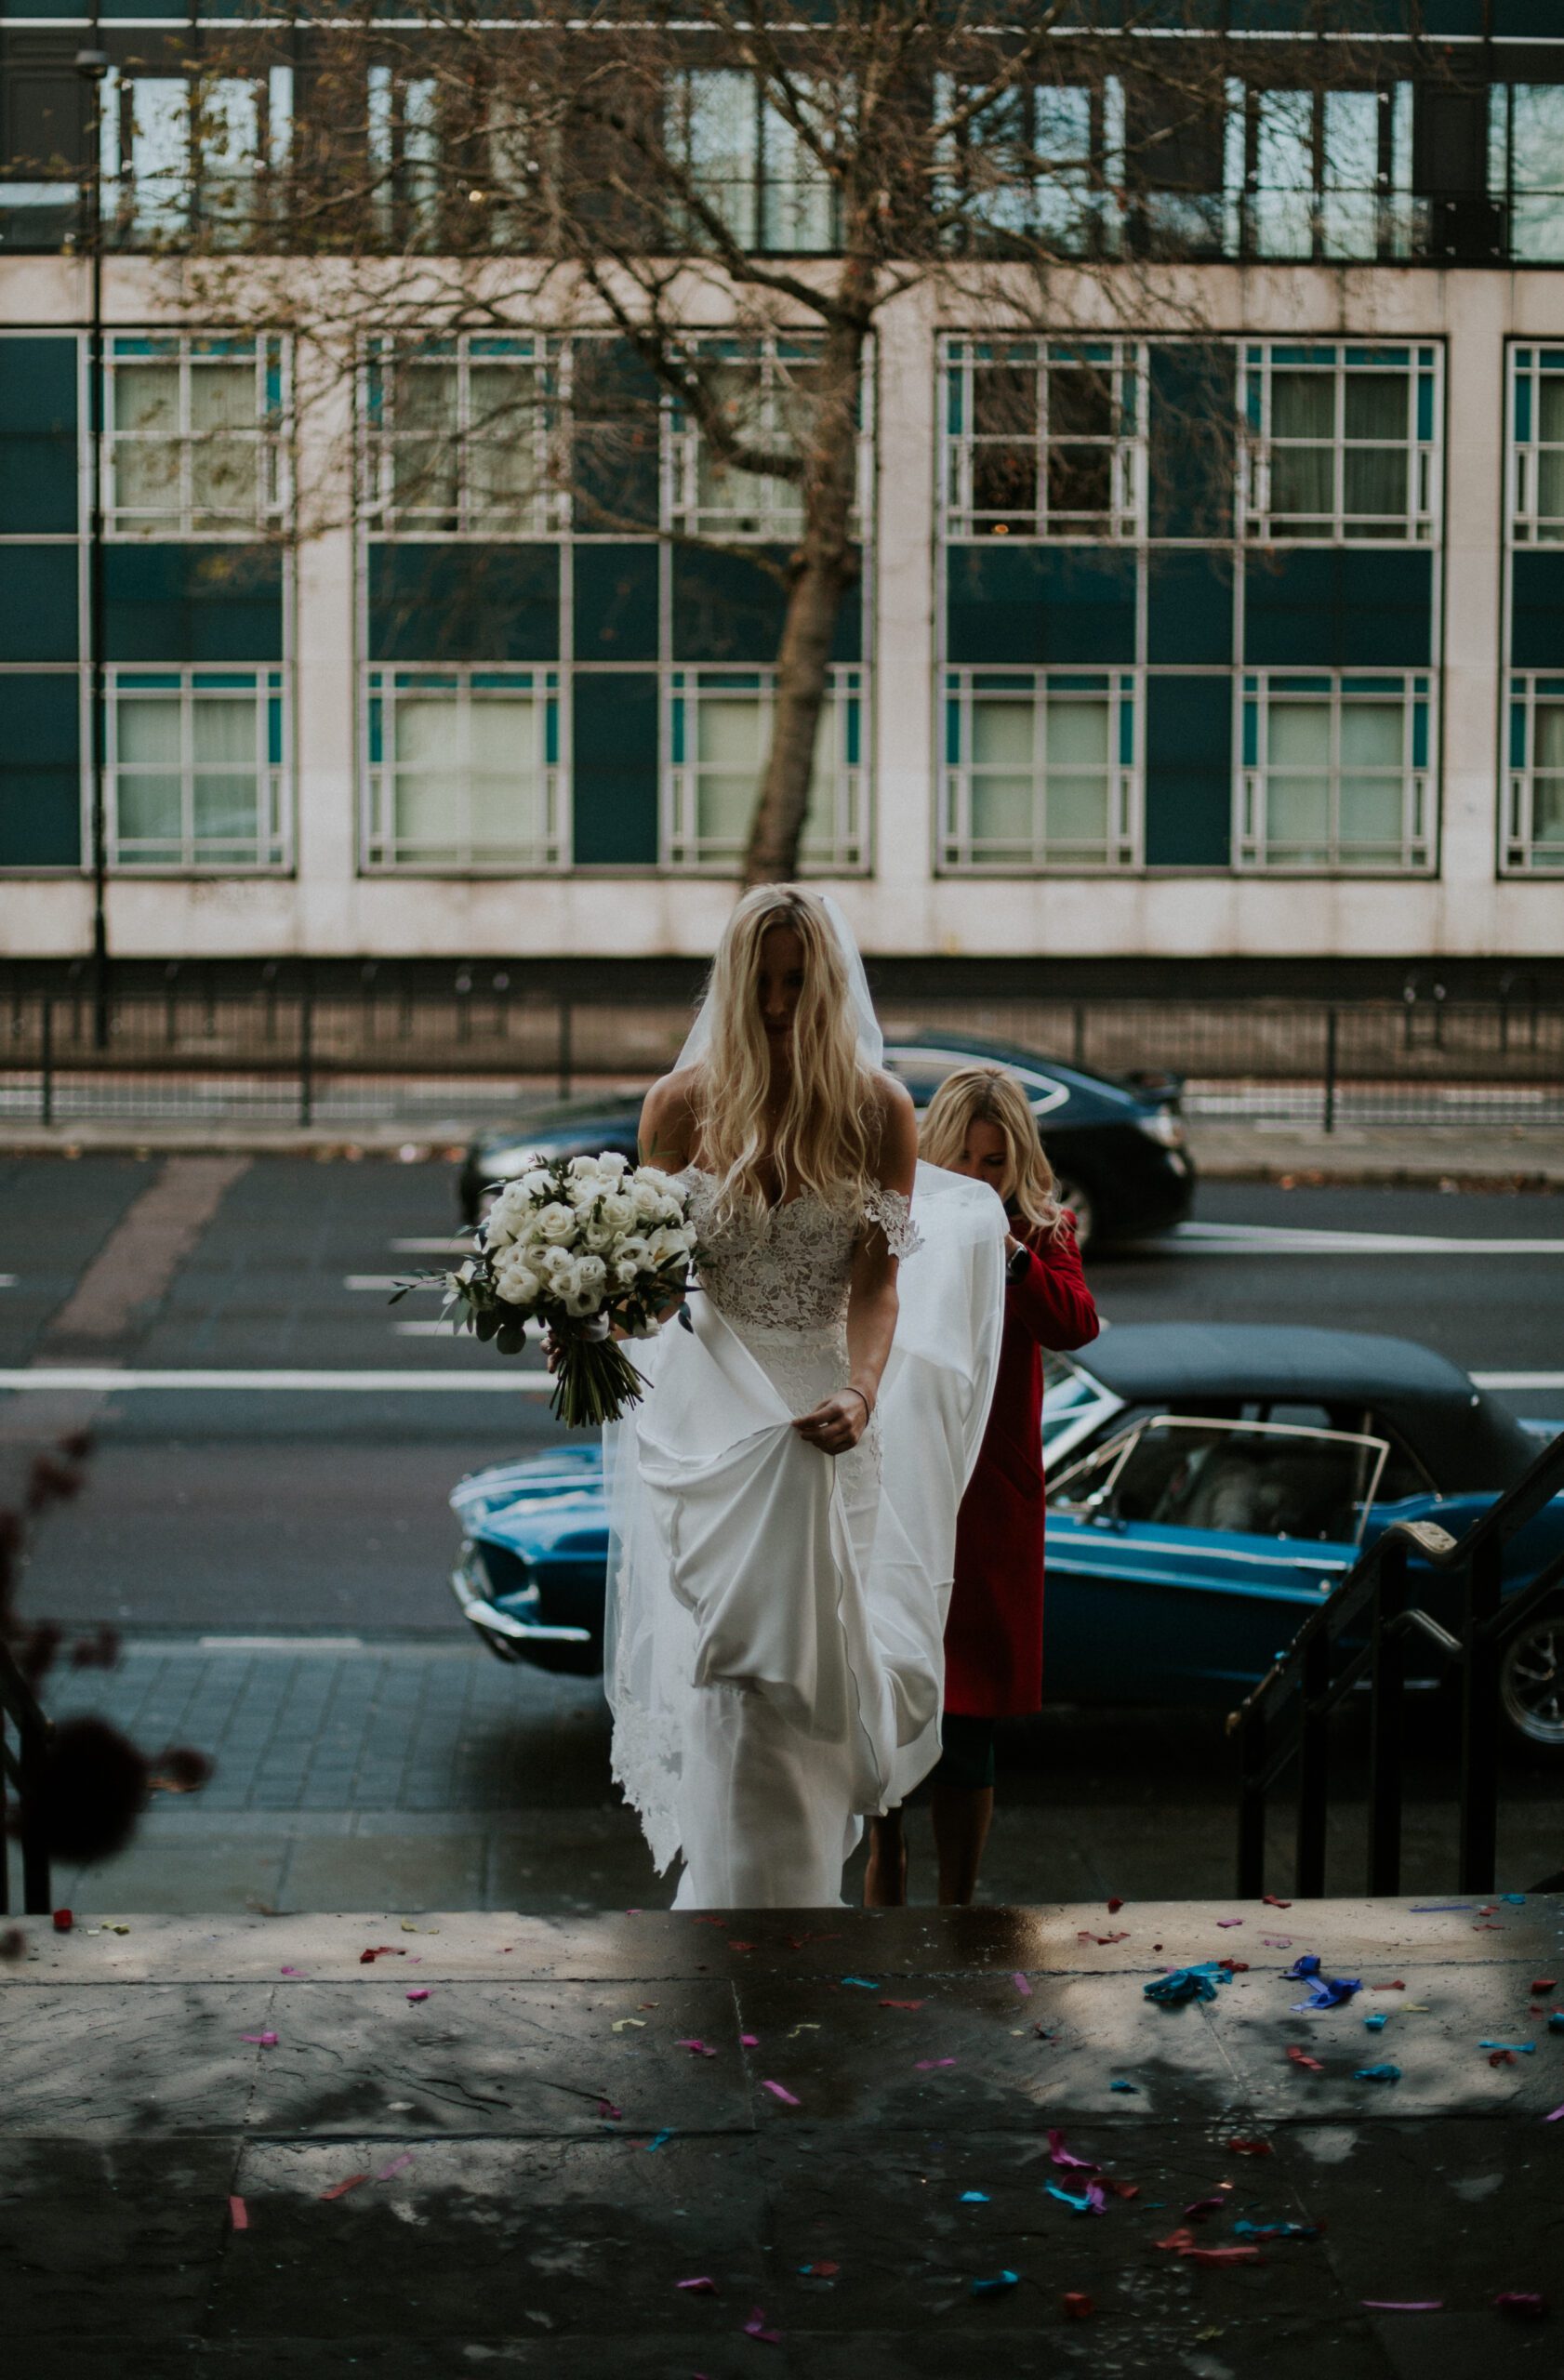 A bride arrives in a vintage car for her wedding ceremony at Old Marylebone Town Hall, London. Old Marylebone Town Hall wedding photography